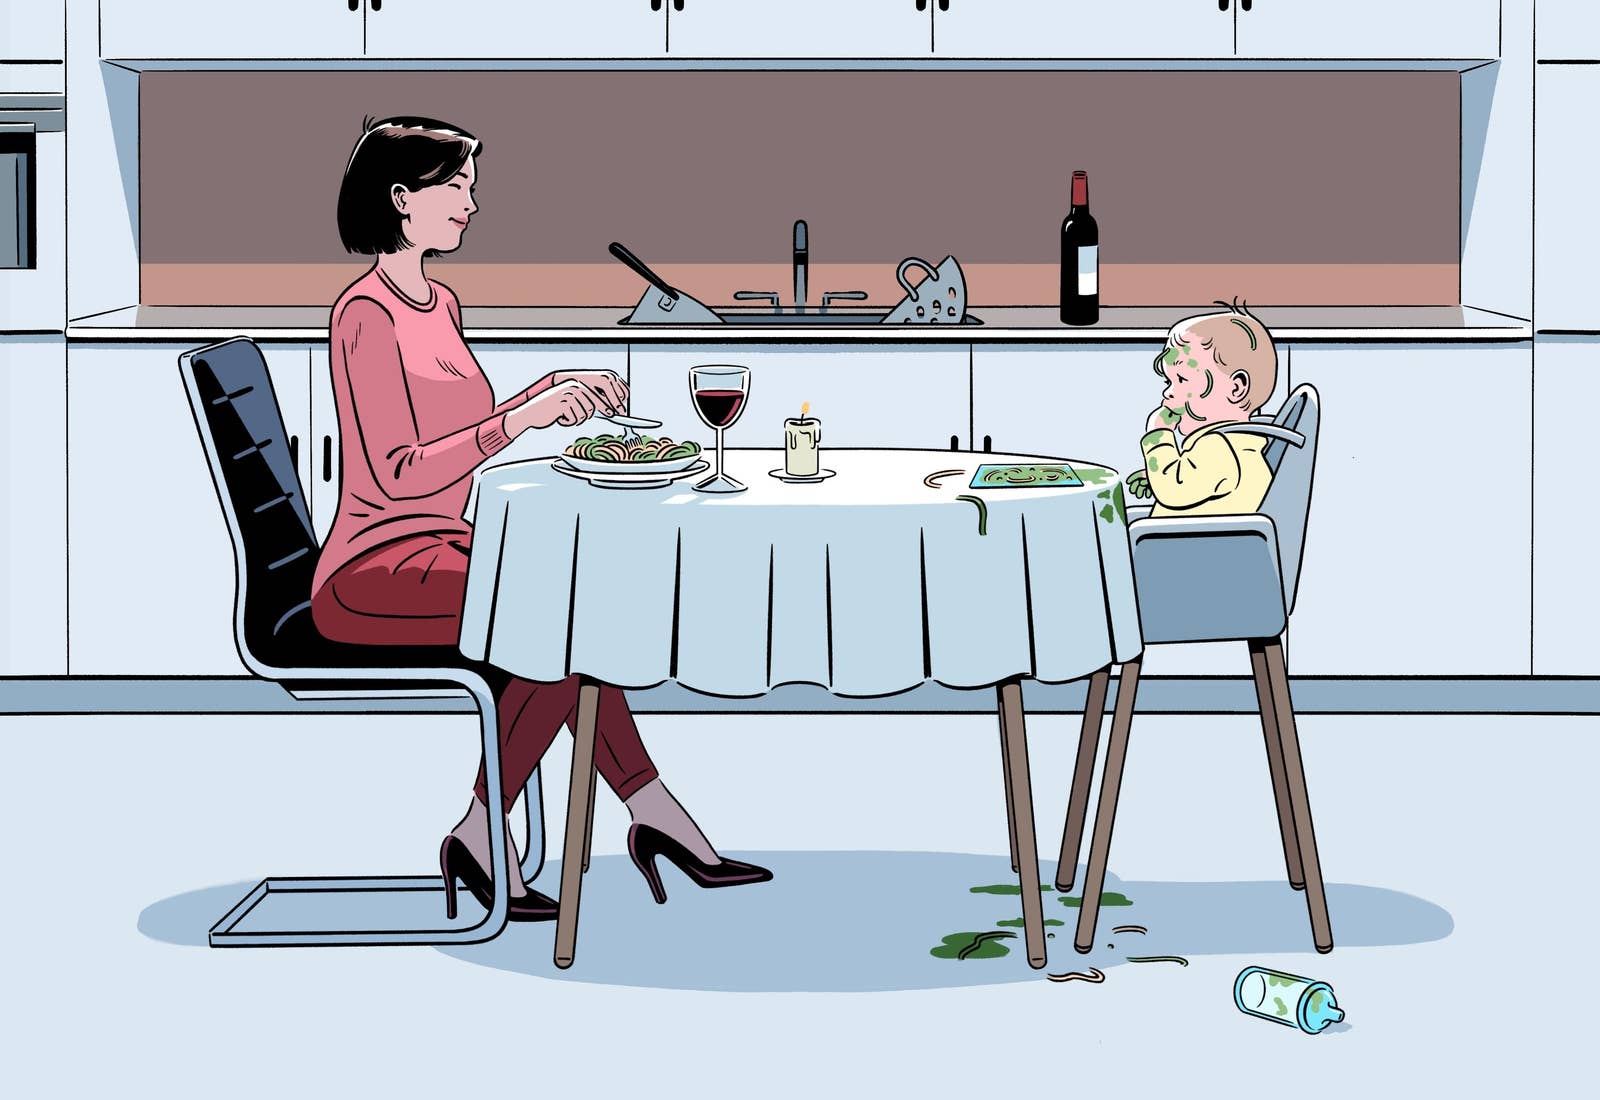 Illustration of a mother and her child dining together in the kitchen; the baby has food all over them